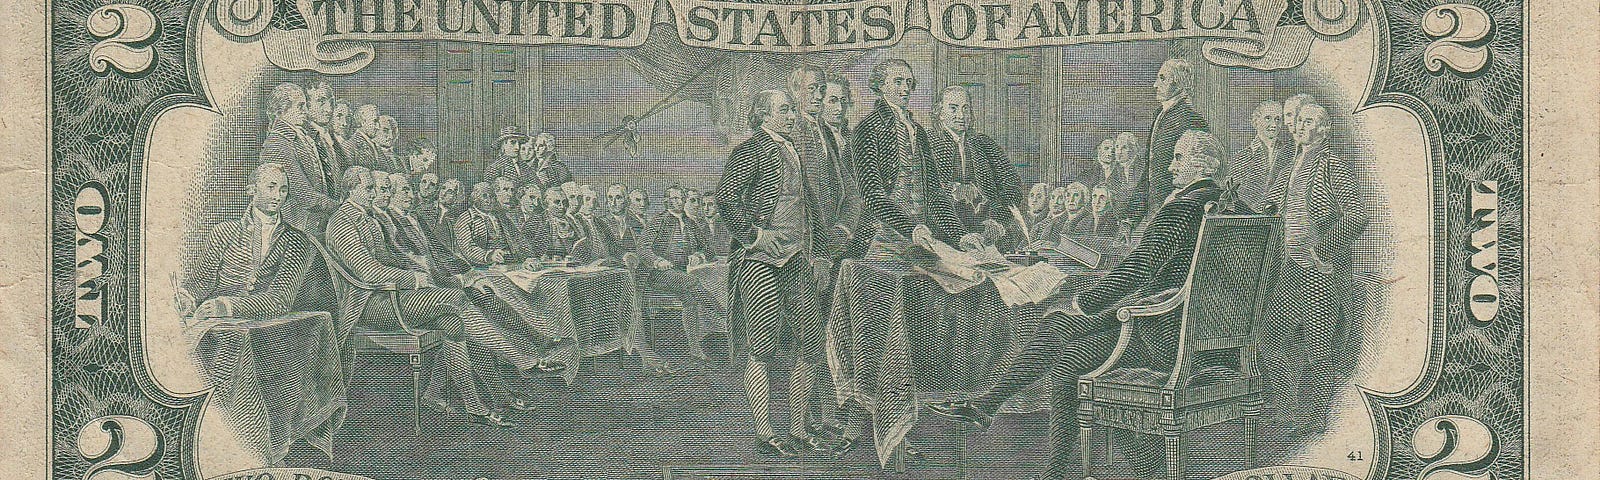 Reverse side of the most recent design of the US two dollar bill, showing the engraving of the signing of the Declaration of Independence.